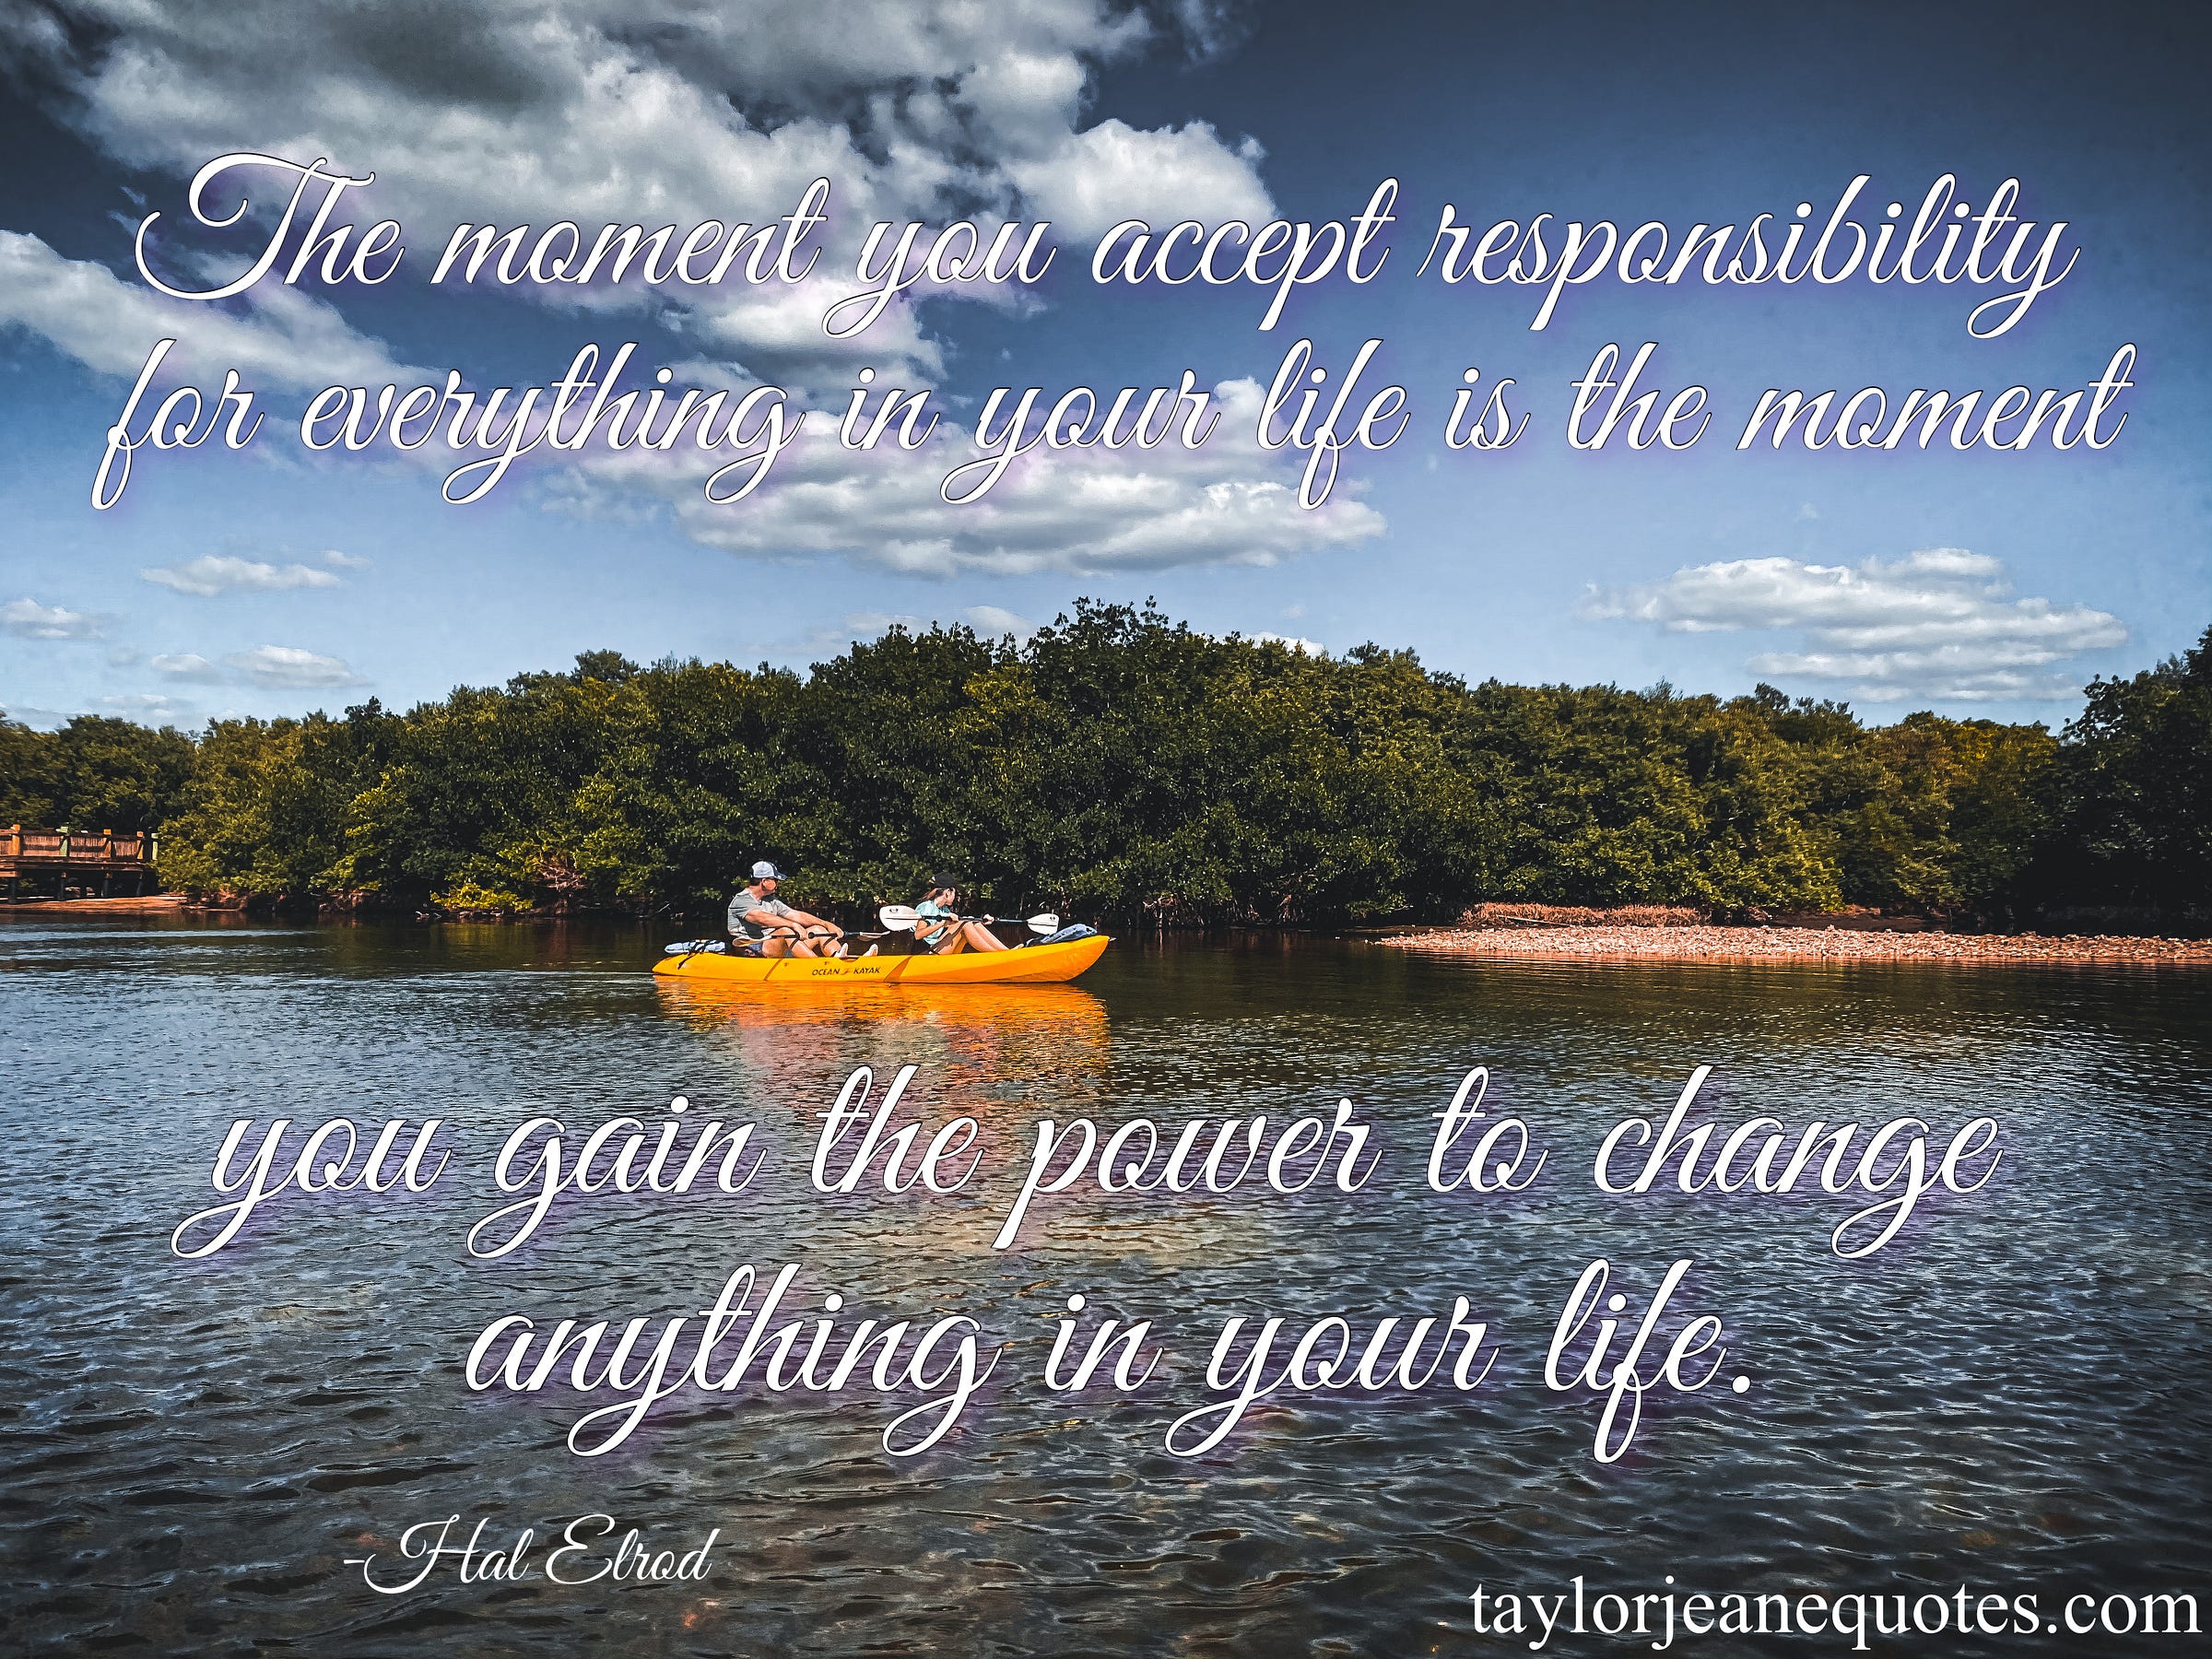 taylor jeane quotes, taylor jeane, taylor wilson, free daily quotes, free inspirational quote of the day email subscription, hal elrod, hal elrod quotes, inspirational quotes, motivational quotes, quote of the day, moment quotes, responsibility quotes, change your life quotes, change quotes, life quotes, goal quotes, kayak, anna maria island, florida, acceptance quotes